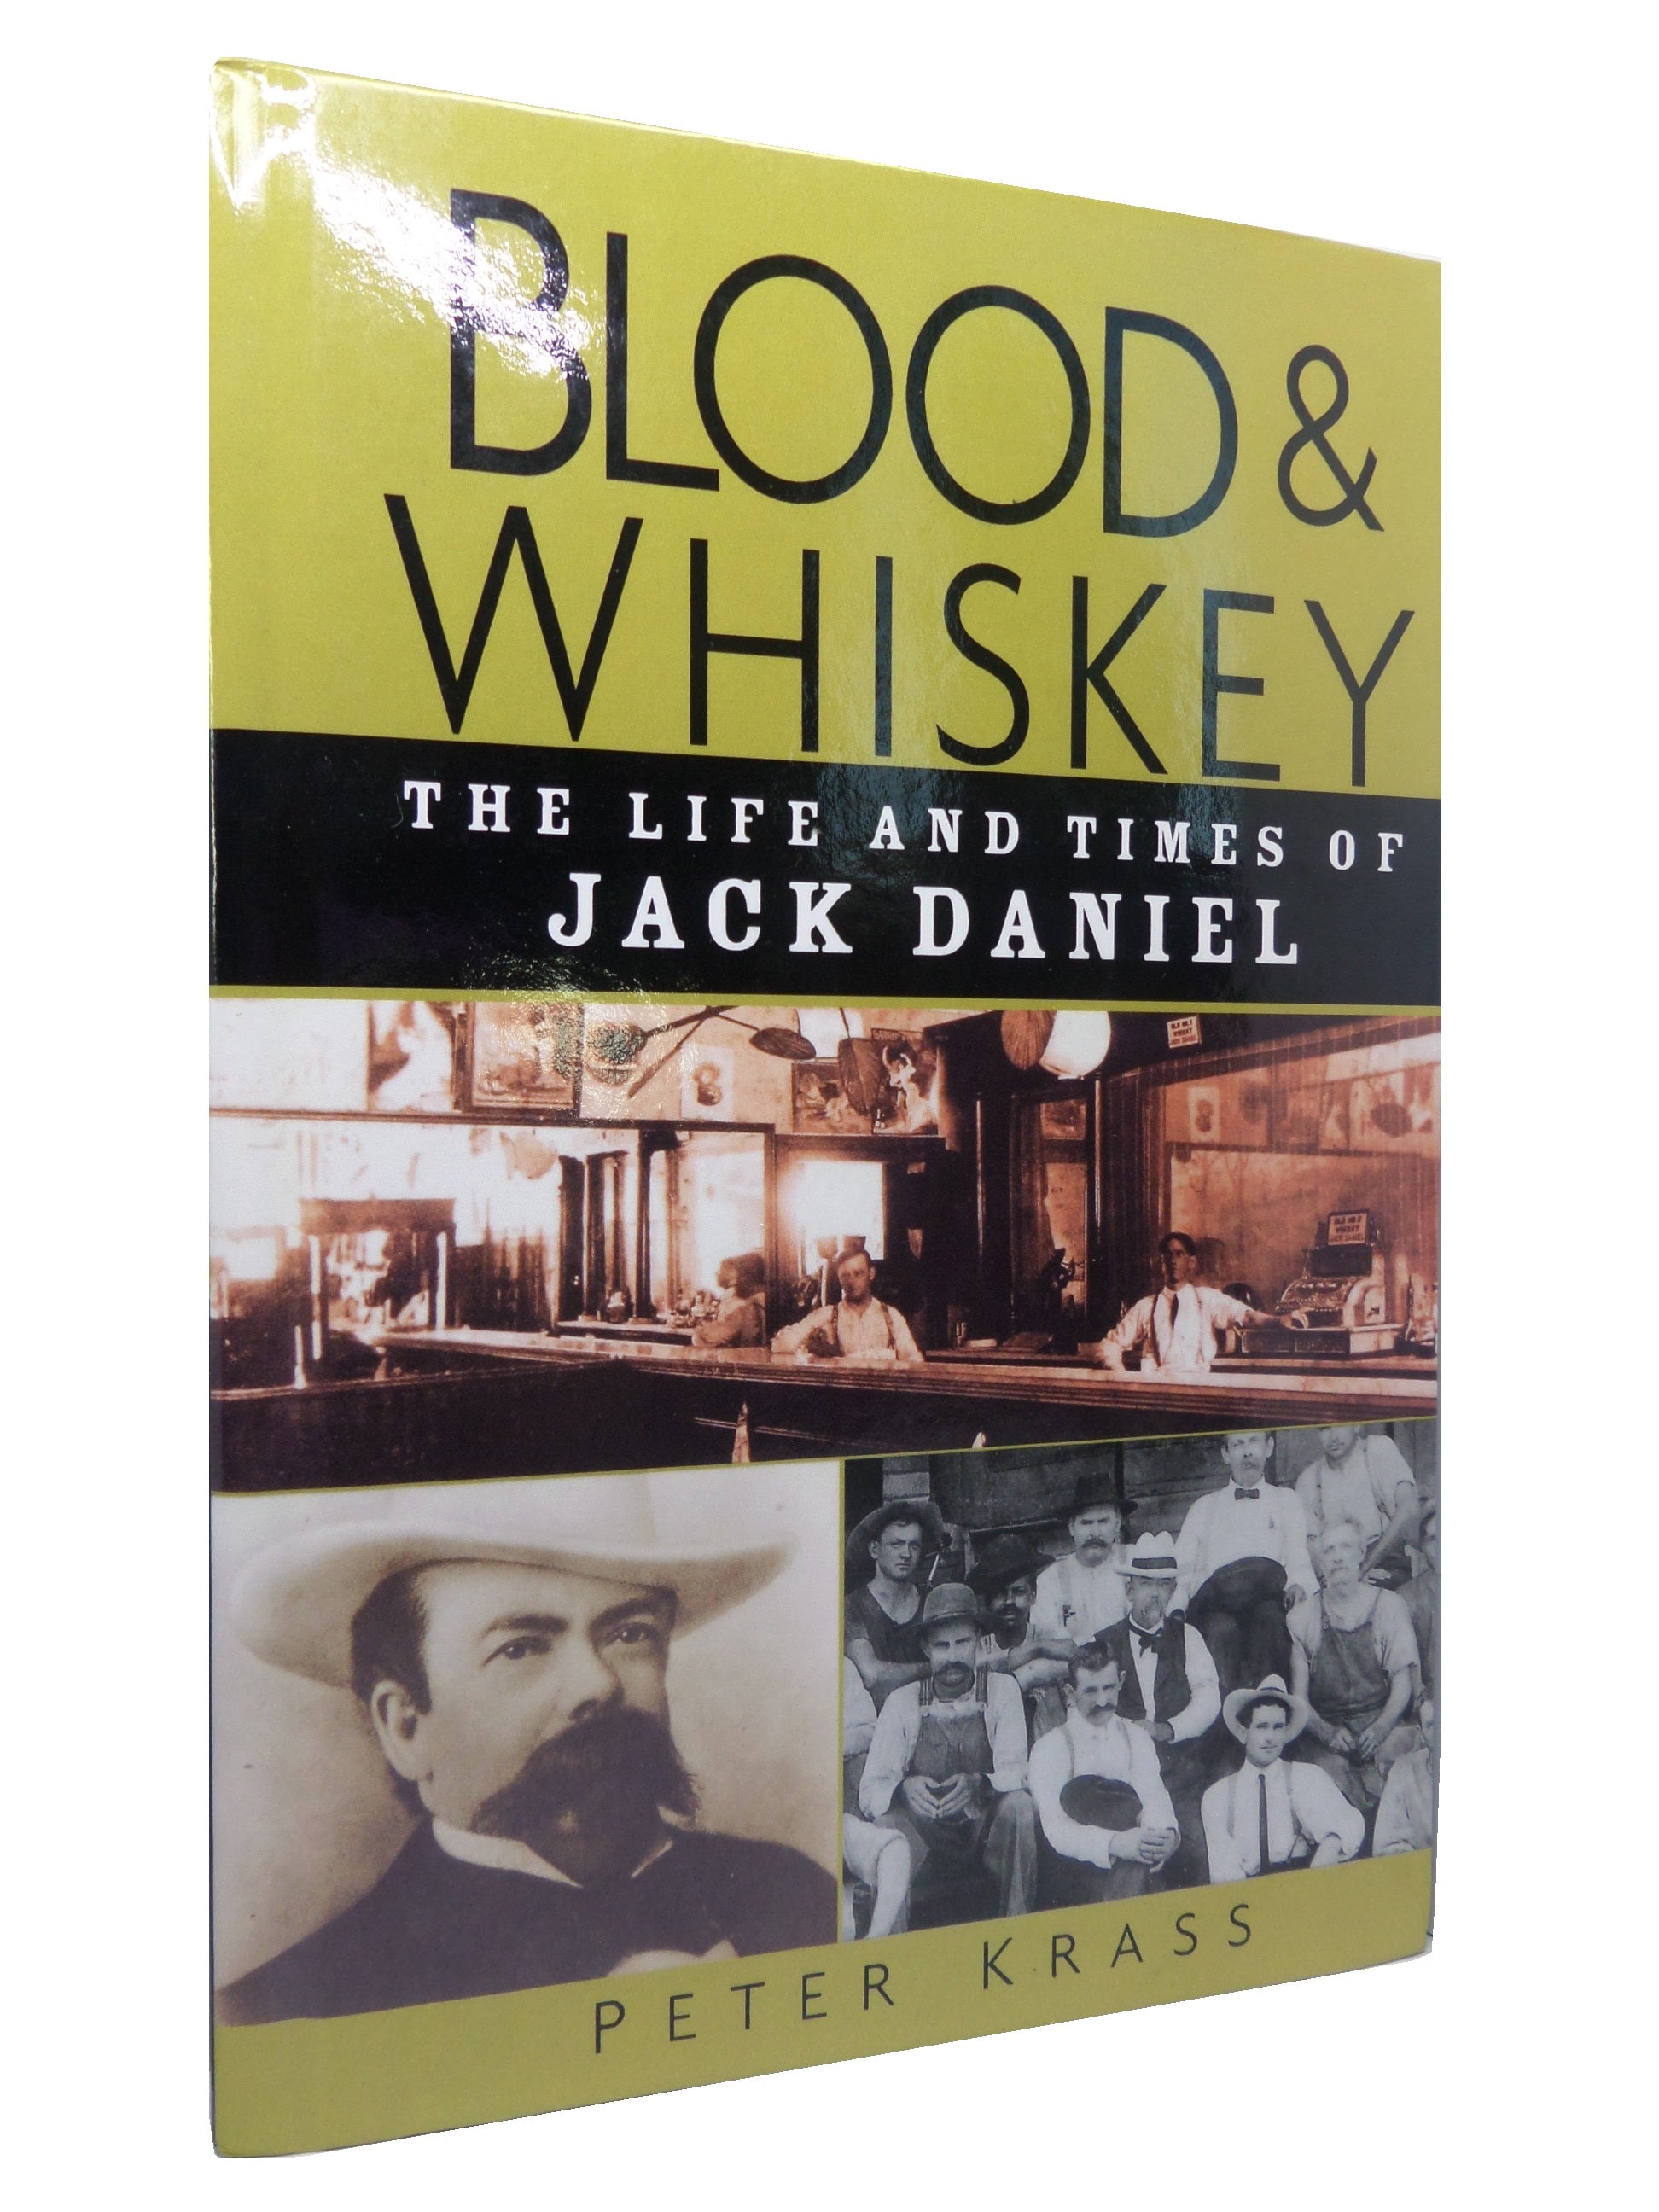 BLOOD & WHISKEY: THE LIFE AND TIMES OF JACK DANIEL BY PETER KRASS 2004 HARDCOVER